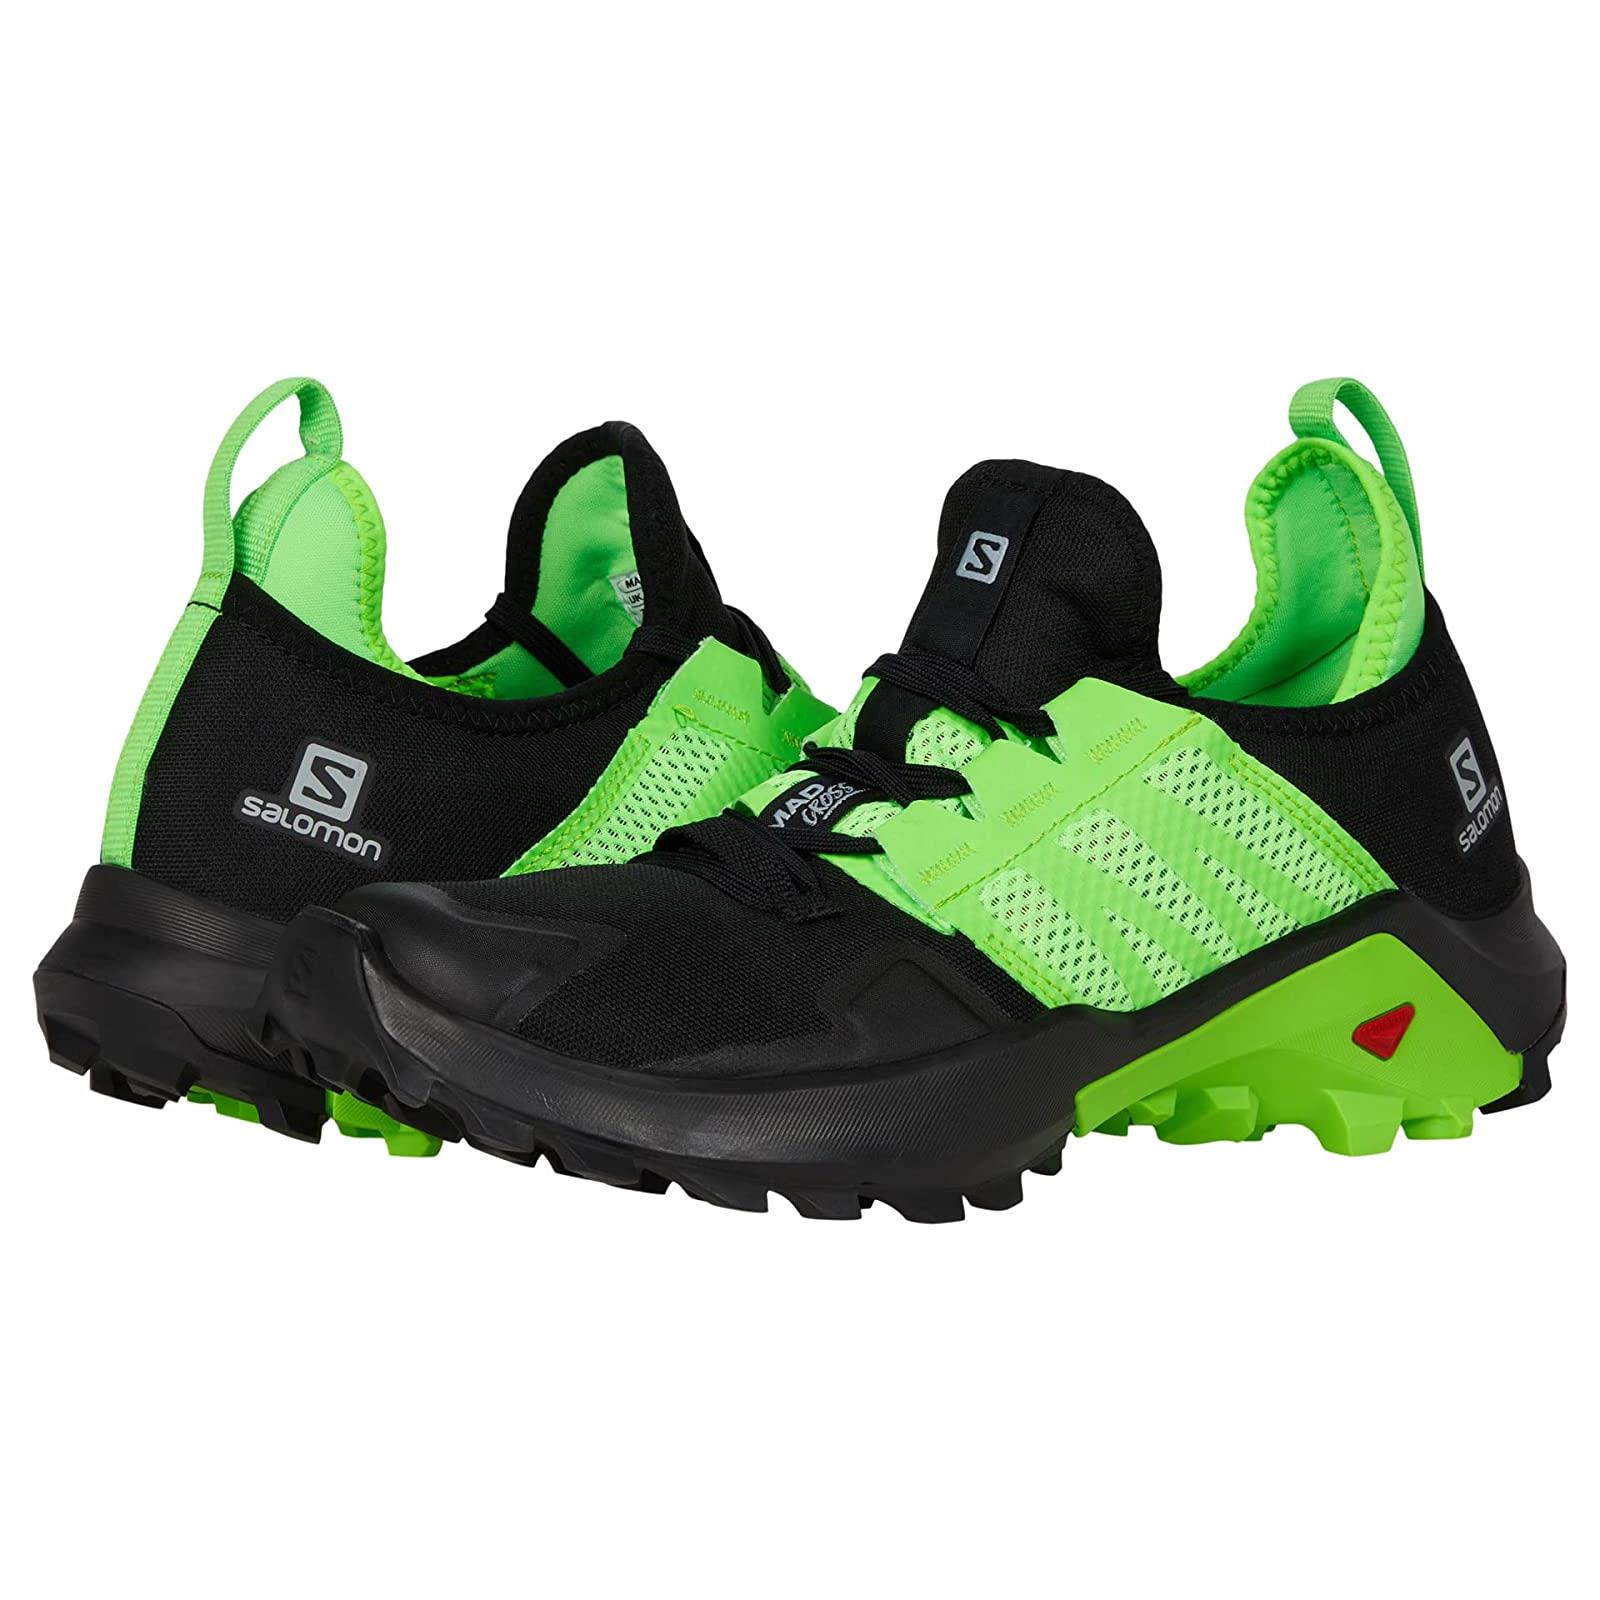 Man`s Sneakers Athletic Shoes Salomon Madcross Black/Green Gecko/Quiet Shade